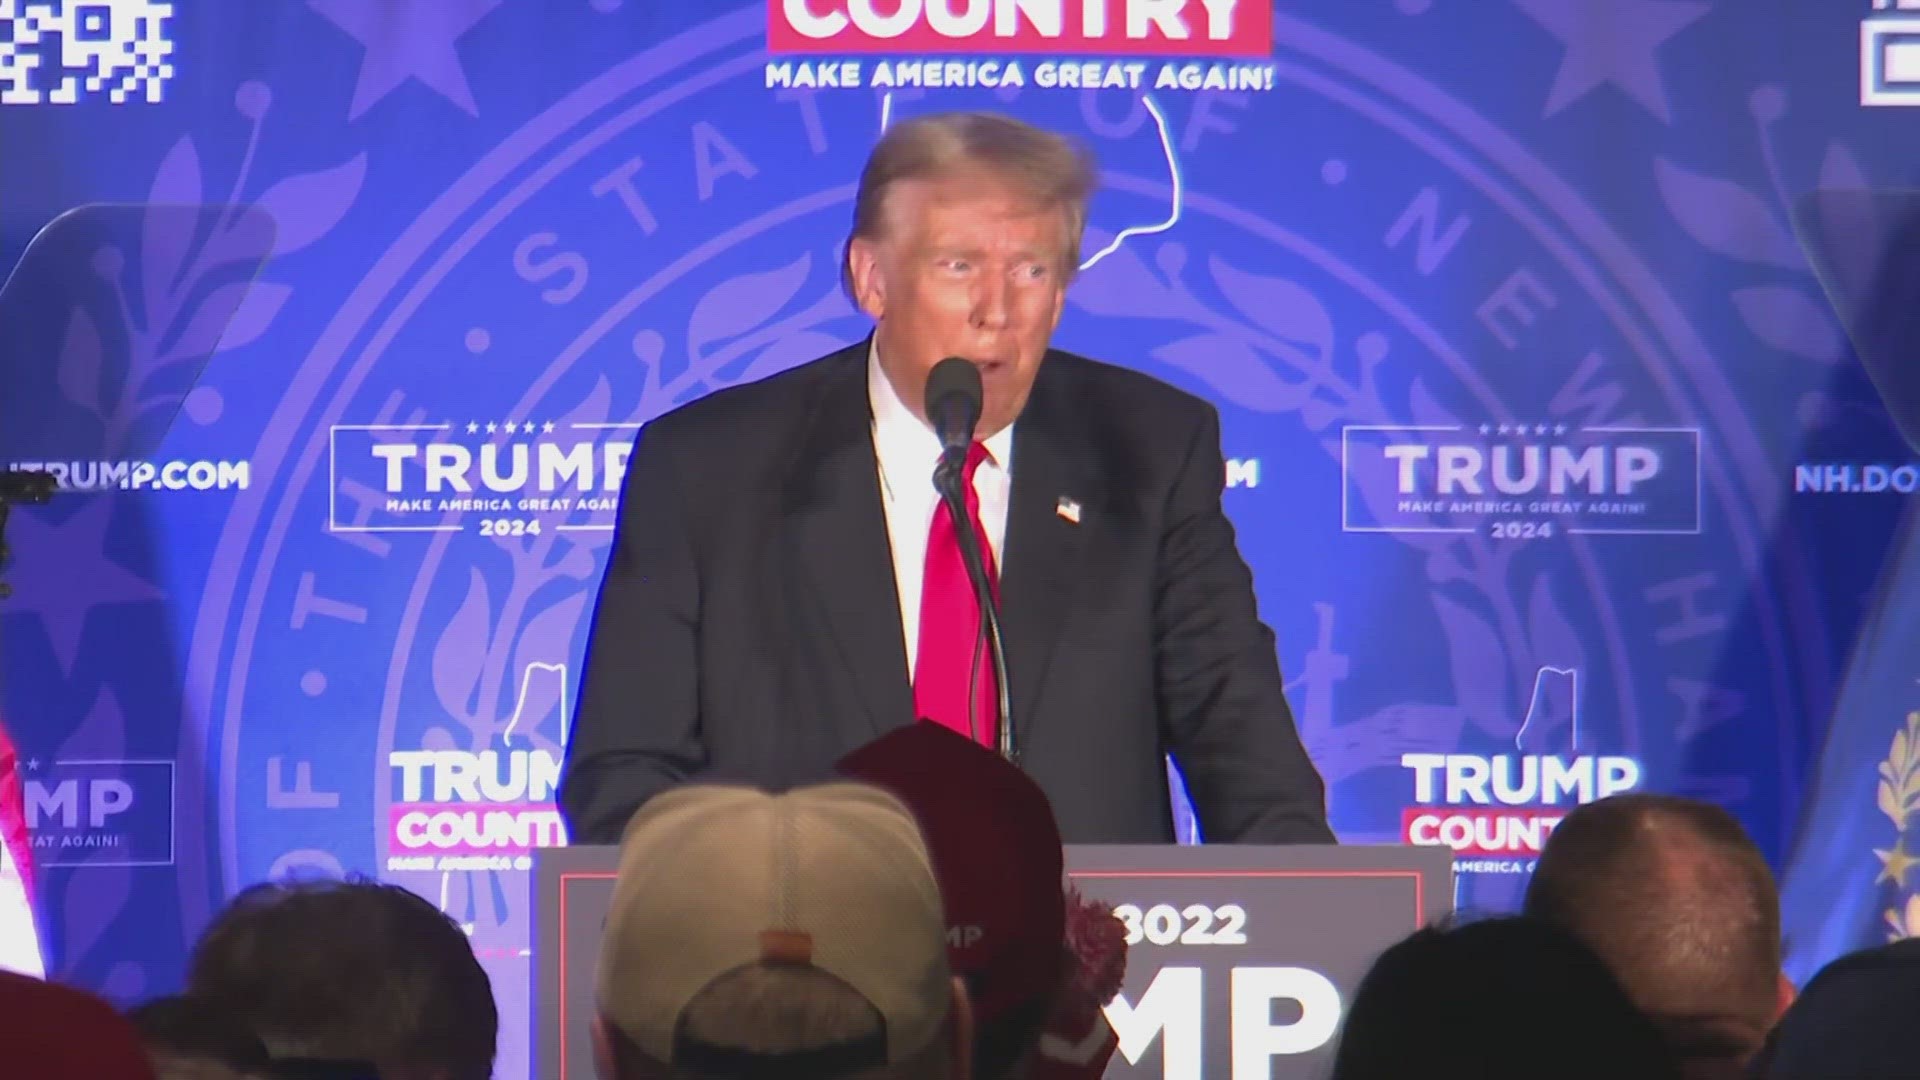 Trump was back on the campaign trail in Portsmouth, New Hampshire Wednesday night.